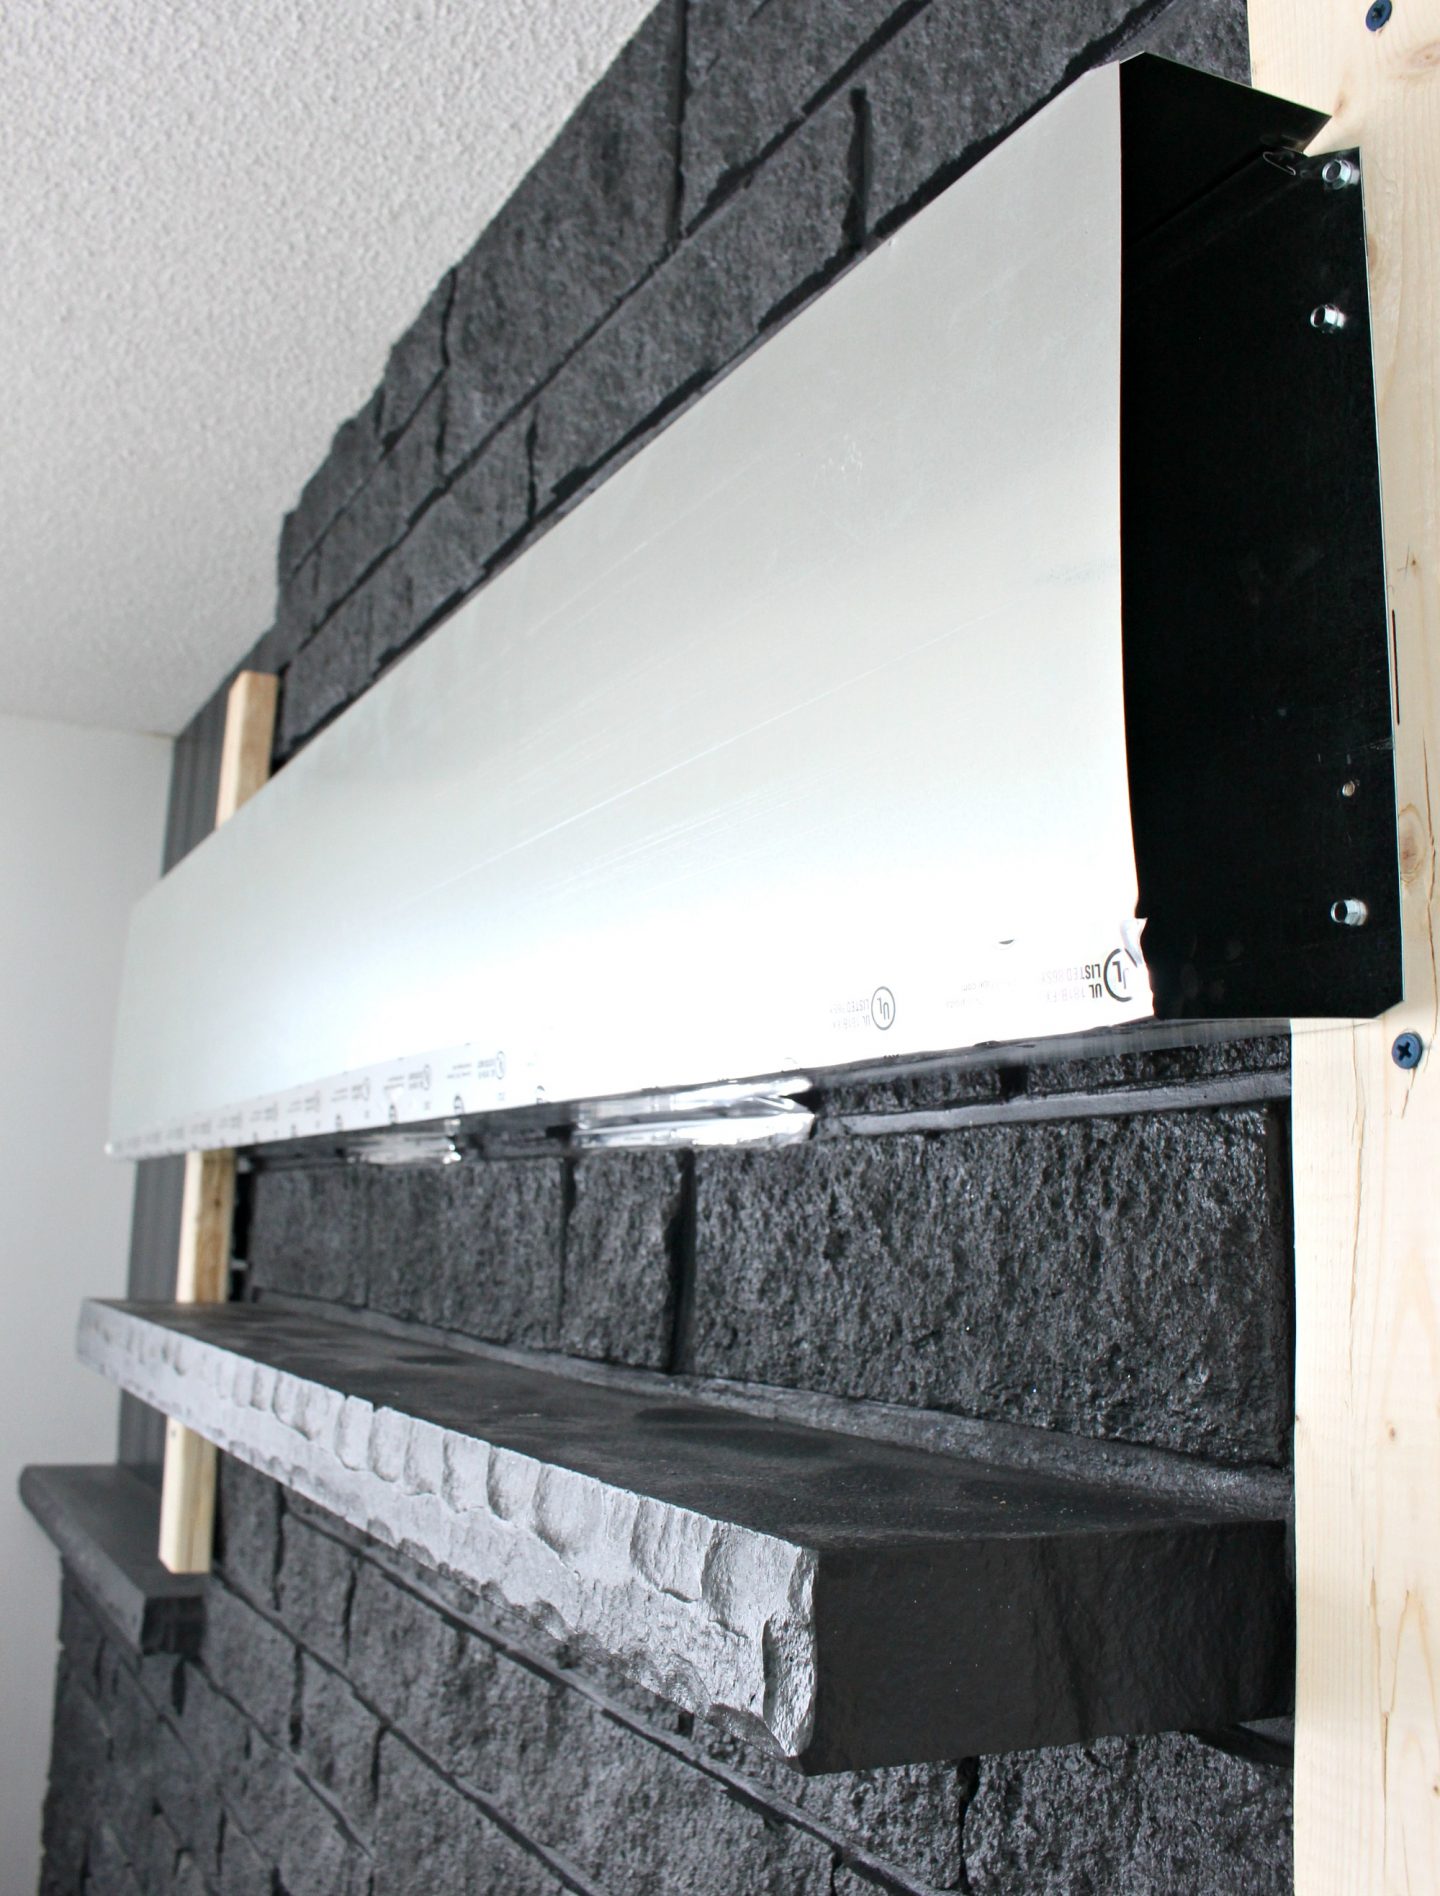 How to Build a Fireplace Bump Out to Hang a TV | How to Hang a TV over Fireplace When Mantle is Too High | Fireplace Hack by Dans le Lakehouse